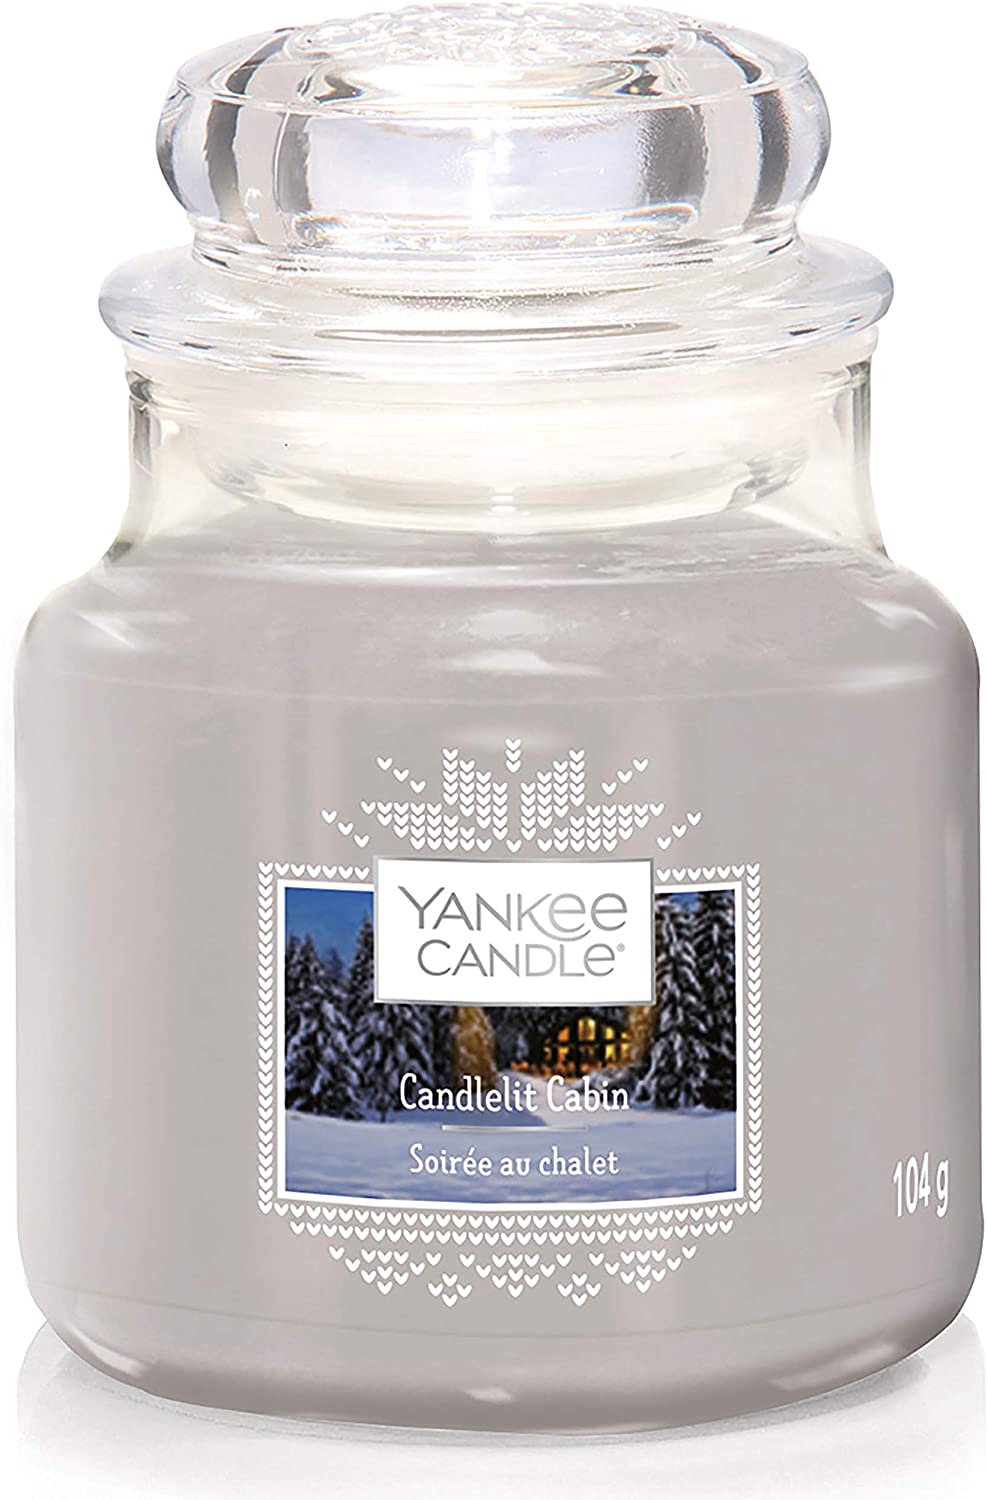 Yankee Candle Scented Candle In Glass